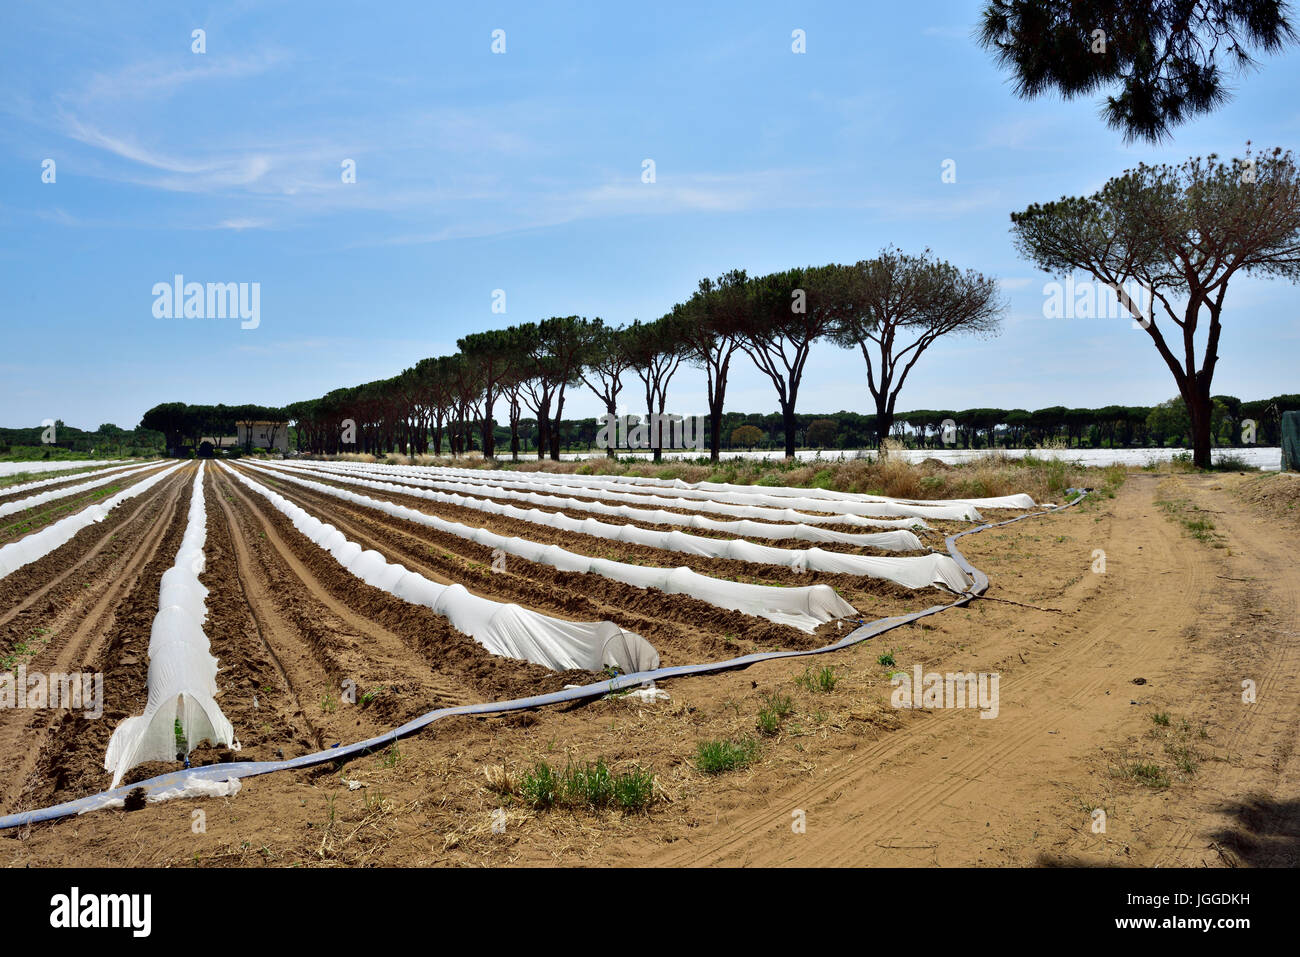 Commercial agricultural field with horticultural polythene fleece film cloches to conserve water and protect new young plants Stock Photo